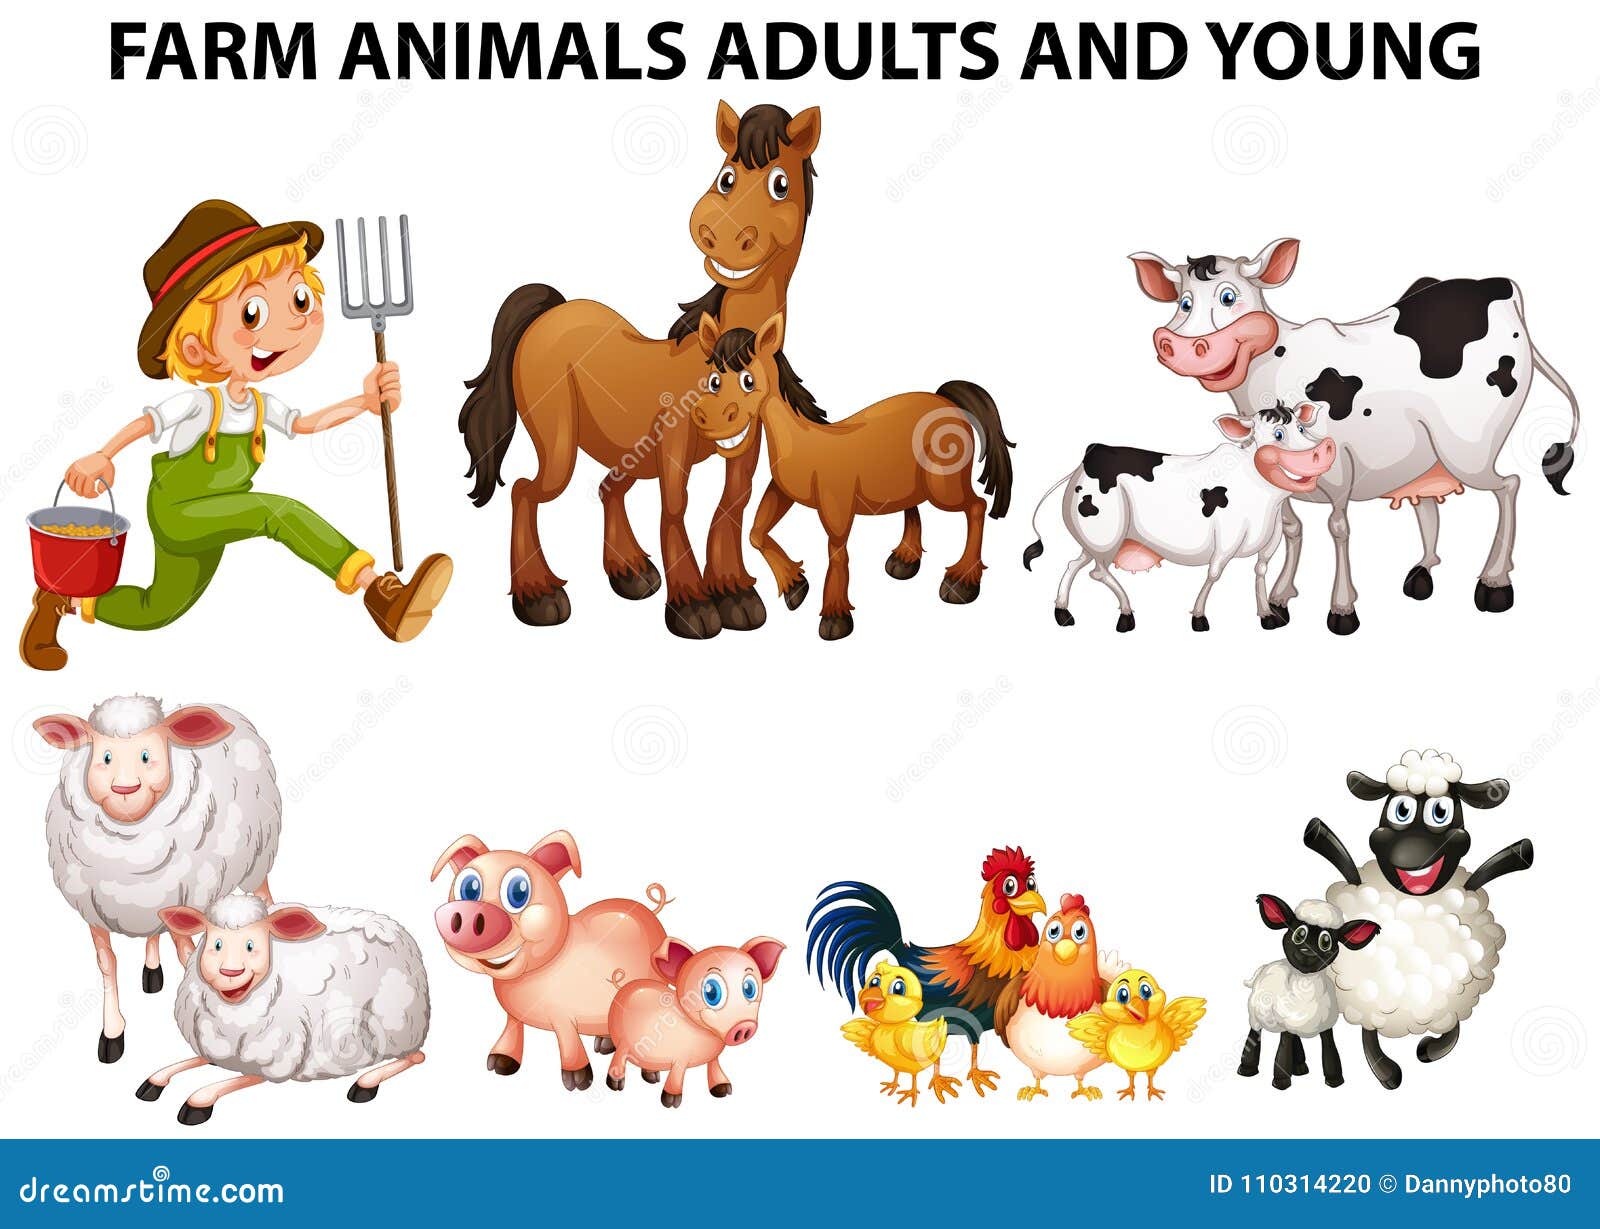 Different Types of Farm Animals with Adults and Youngs Stock Vector